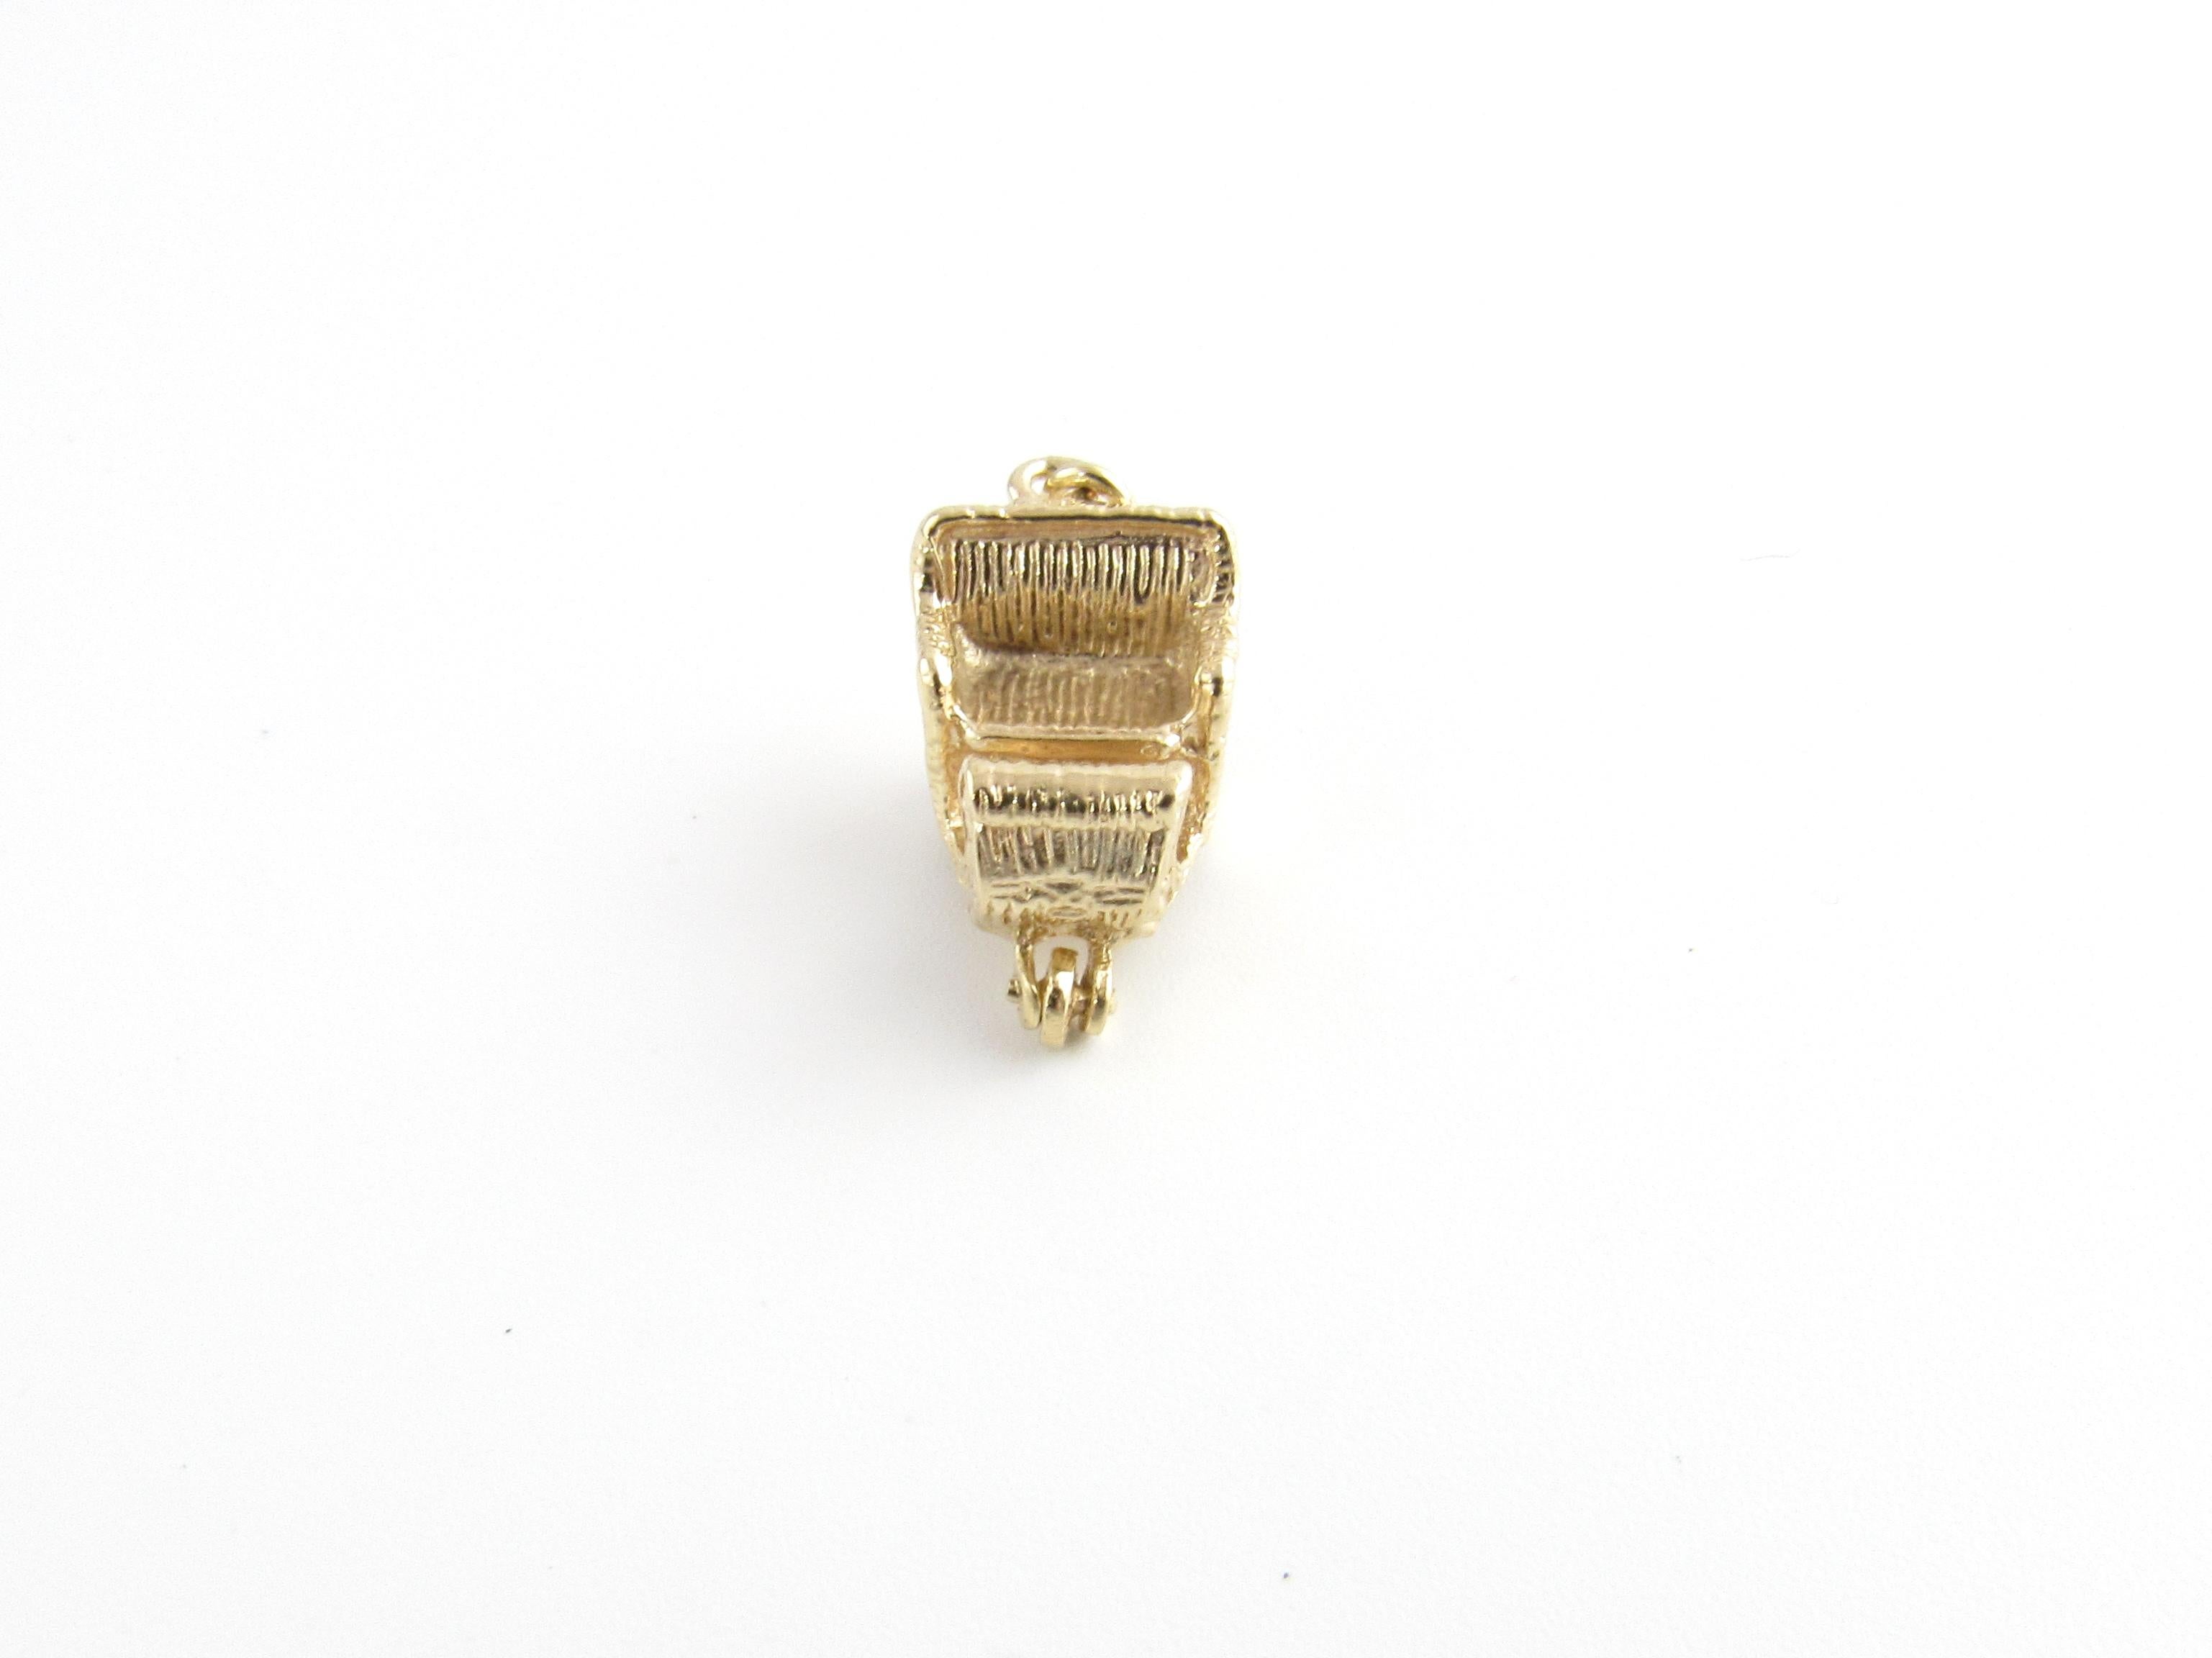 Vintage 14 Karat Yellow Gold Carriage / Buggy Charm

This 3D charm features a miniature buggy beautifully detailed in 14K yellow gold.

Size: 19 mm x 12 mm

Weight: 2.0 dwt. / 3.2 gr.

Acid tested for 14K gold.

Very good condition, professionally